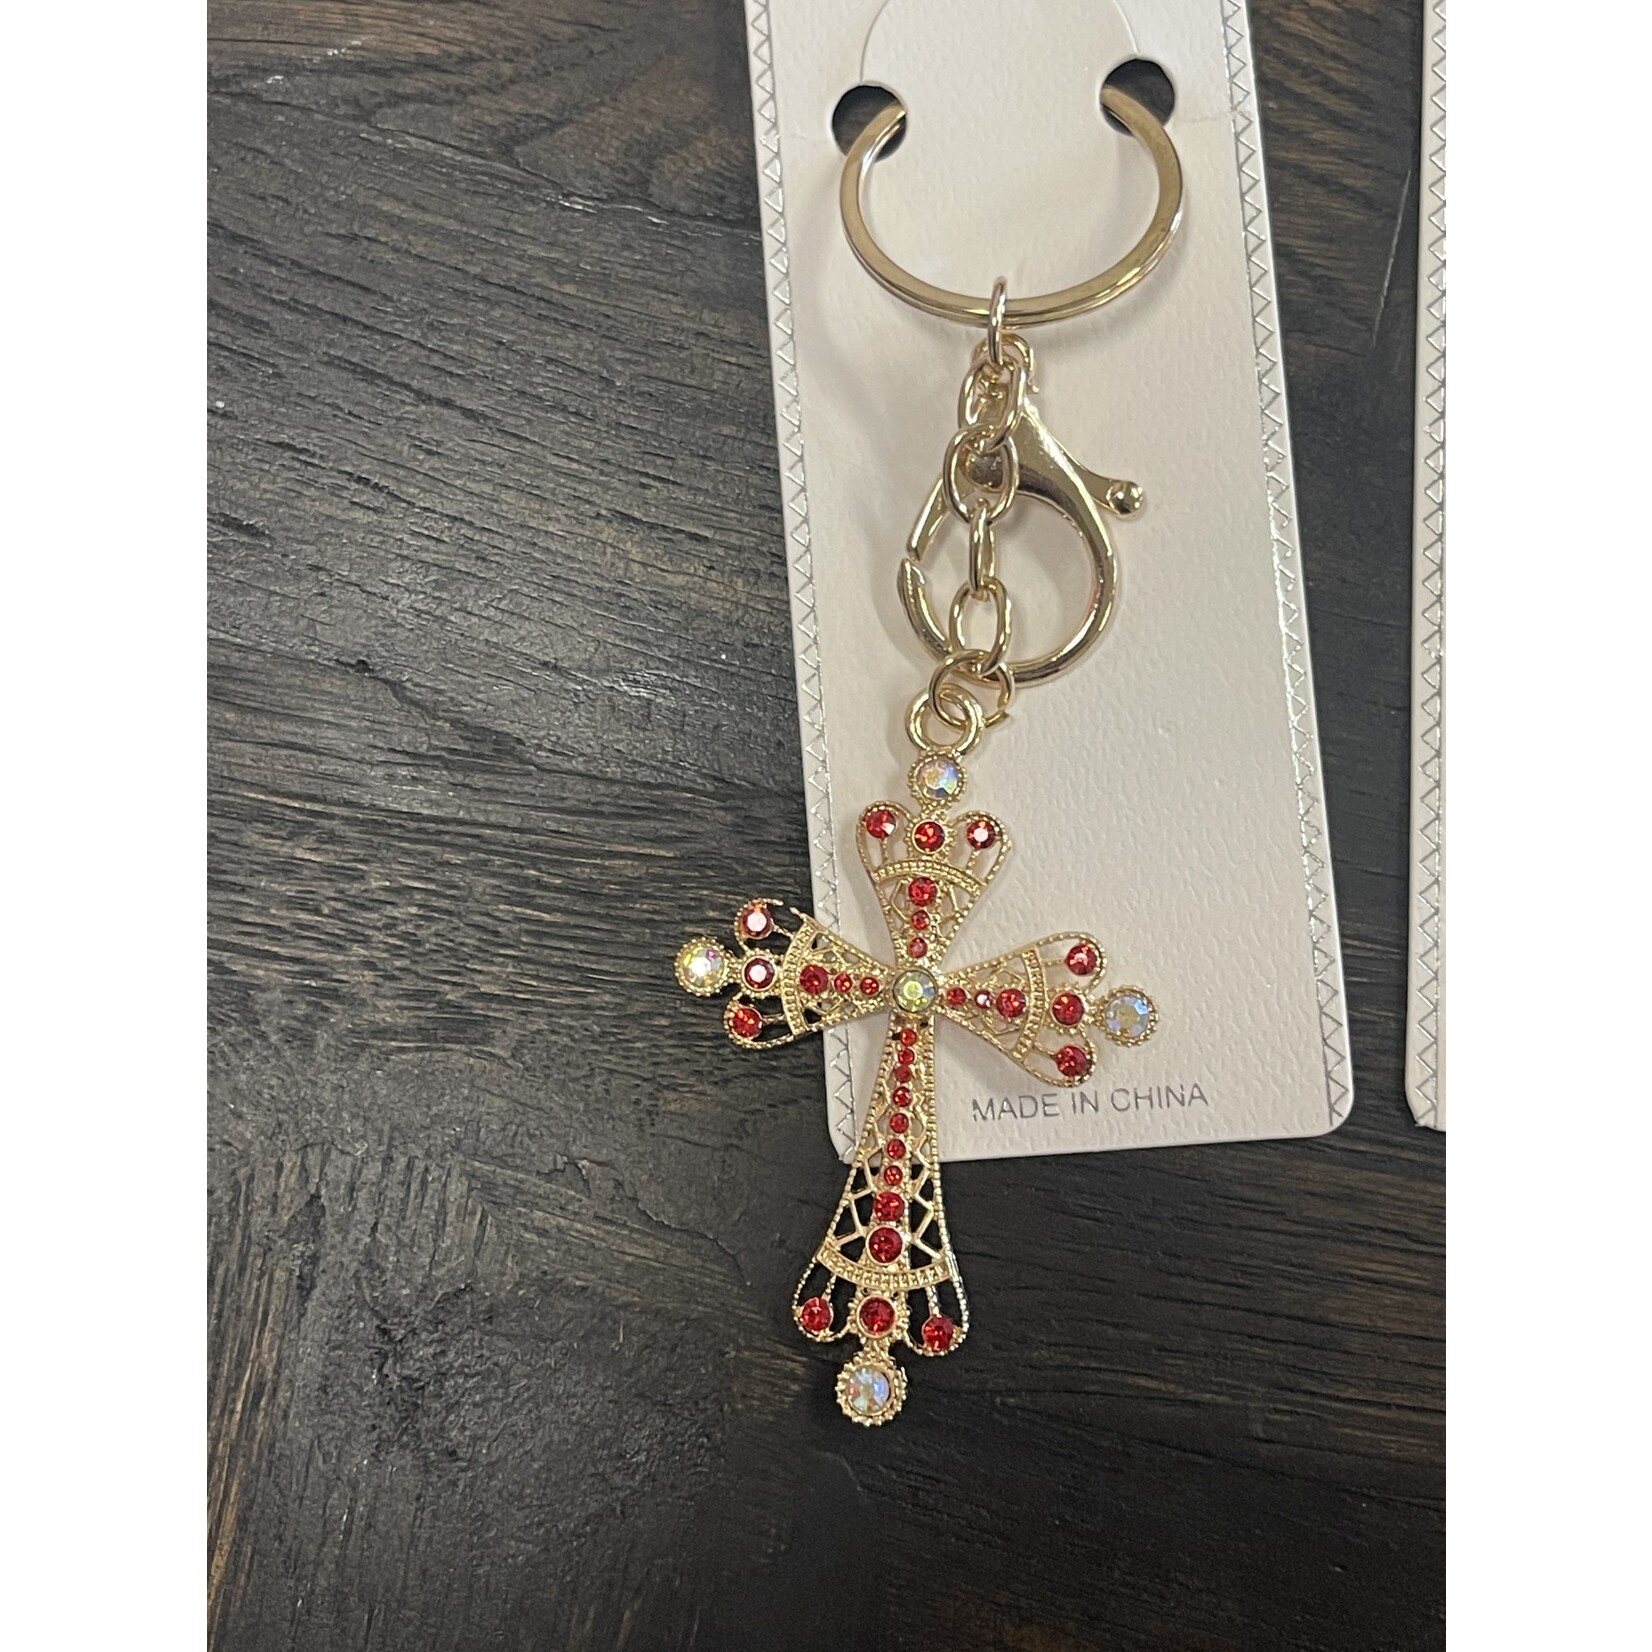 JHP Collection -  Faire Cross Rhinestone with Pearl Keychains